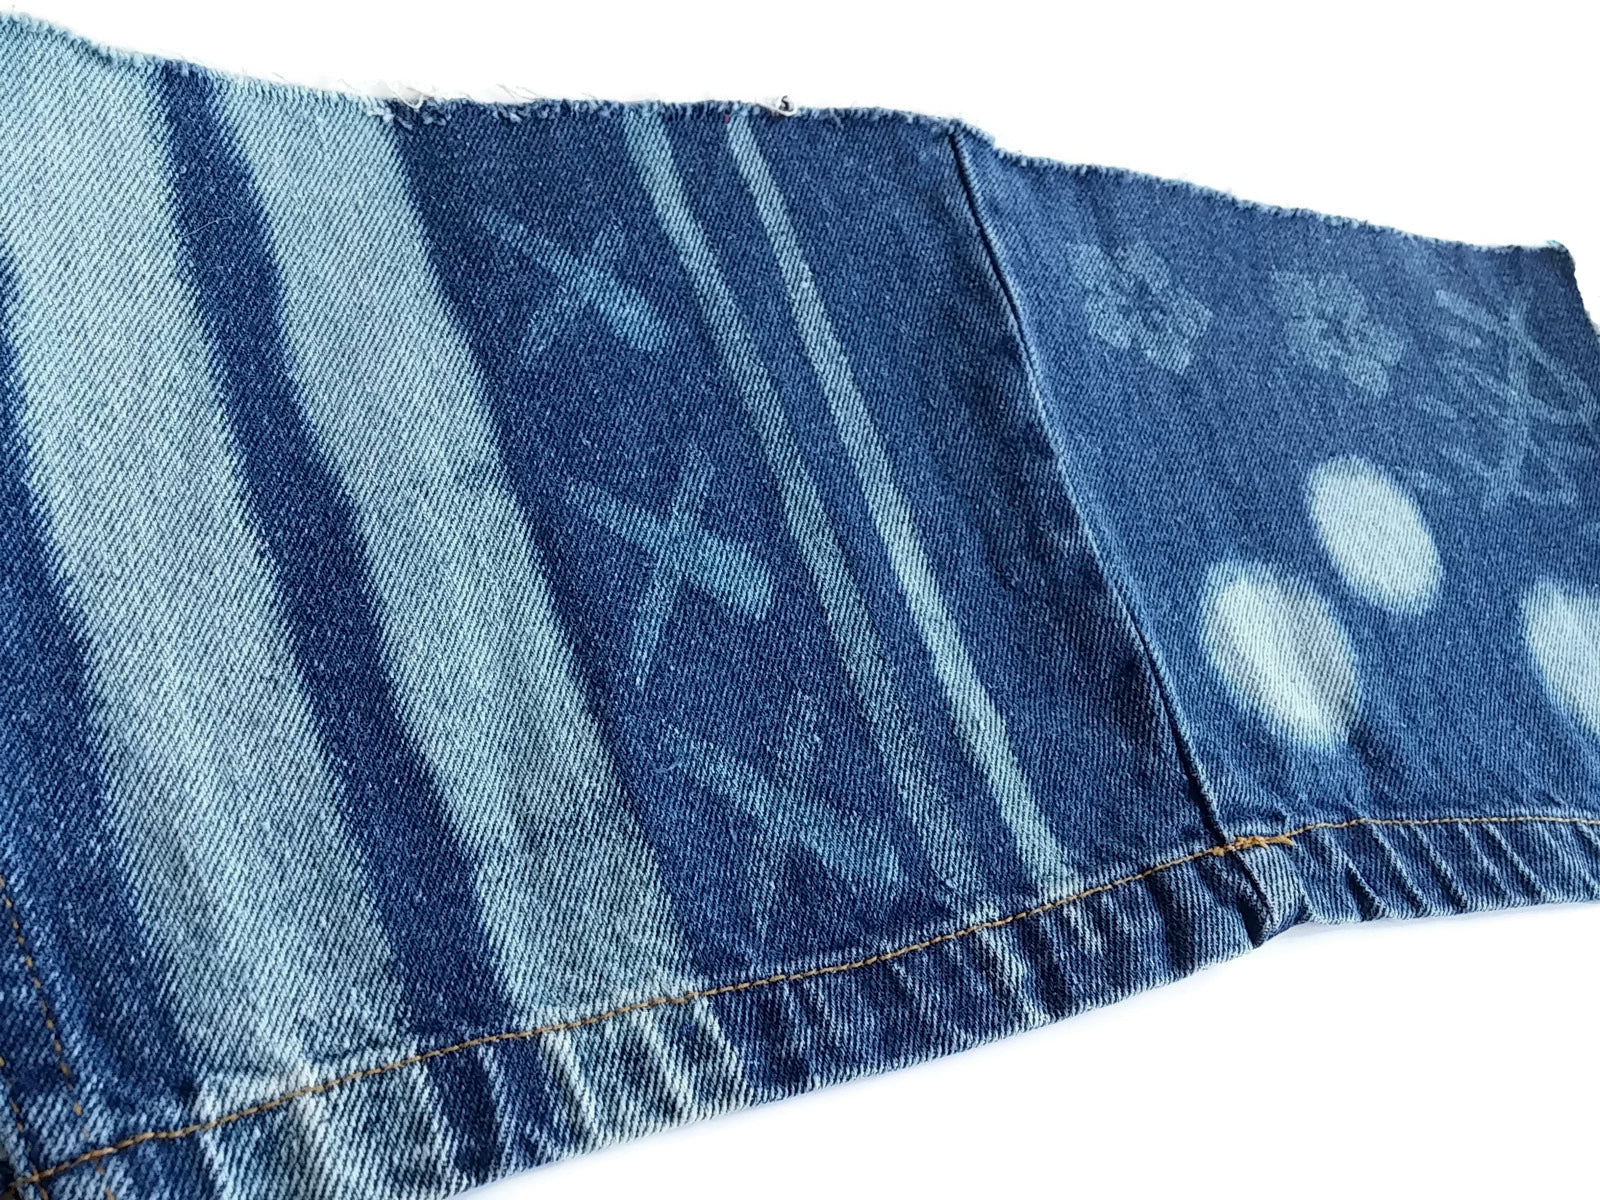 Fun with jeans and bleach - create your own fabric